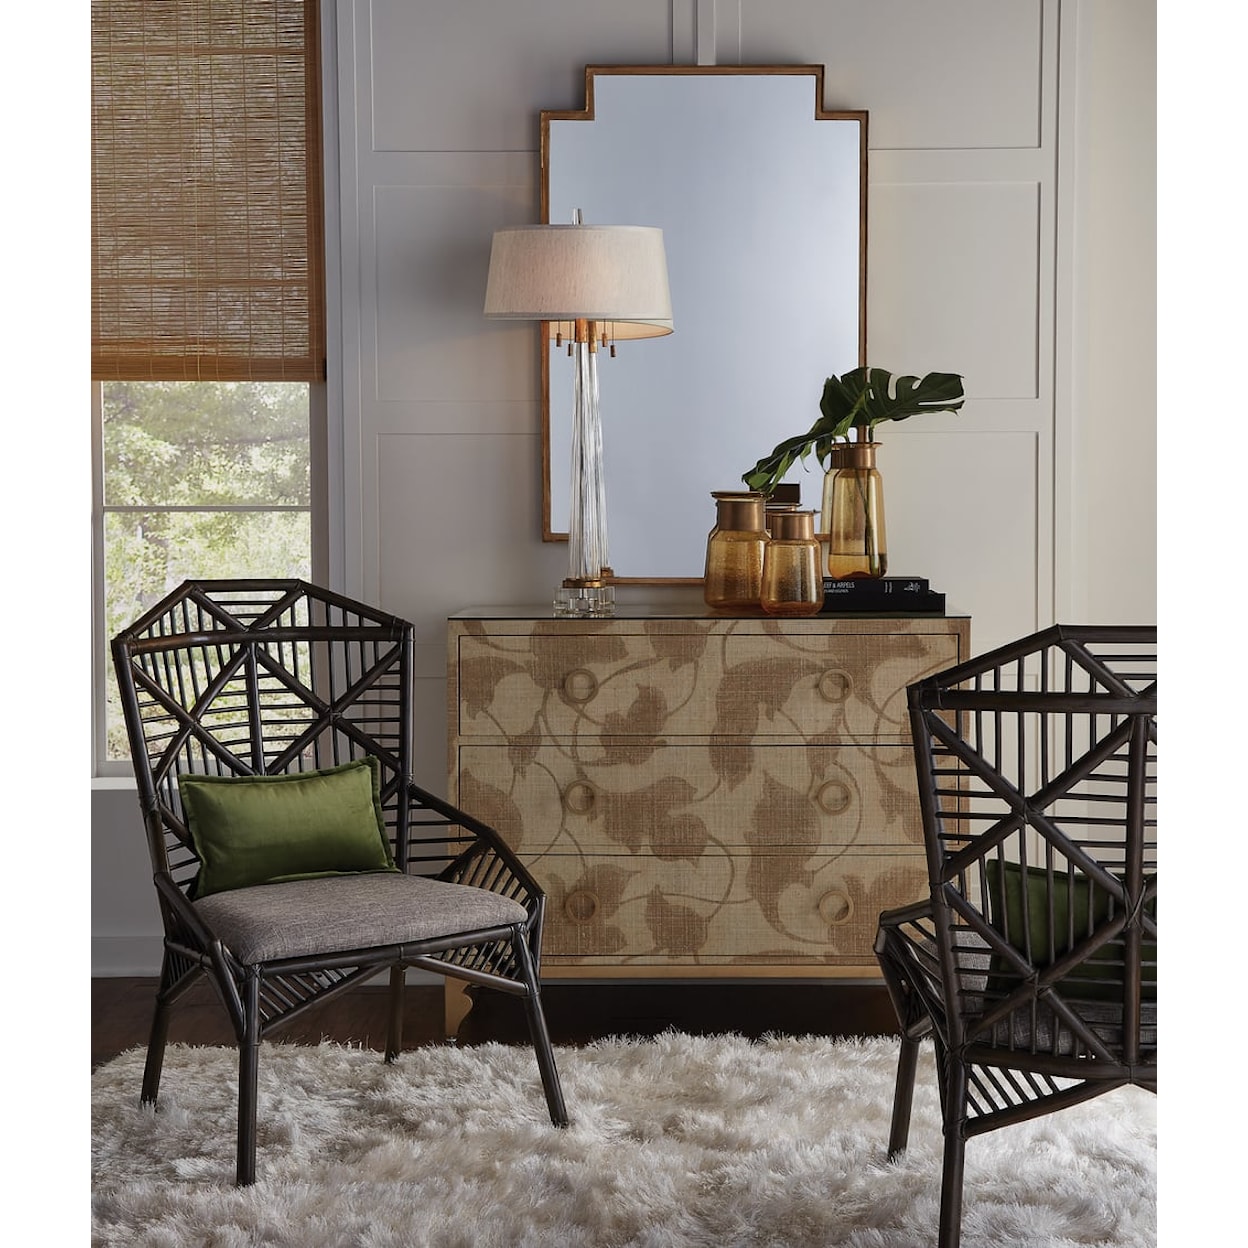 Wildwood Lamps Mirrors FIONA MIRROR- GOLD